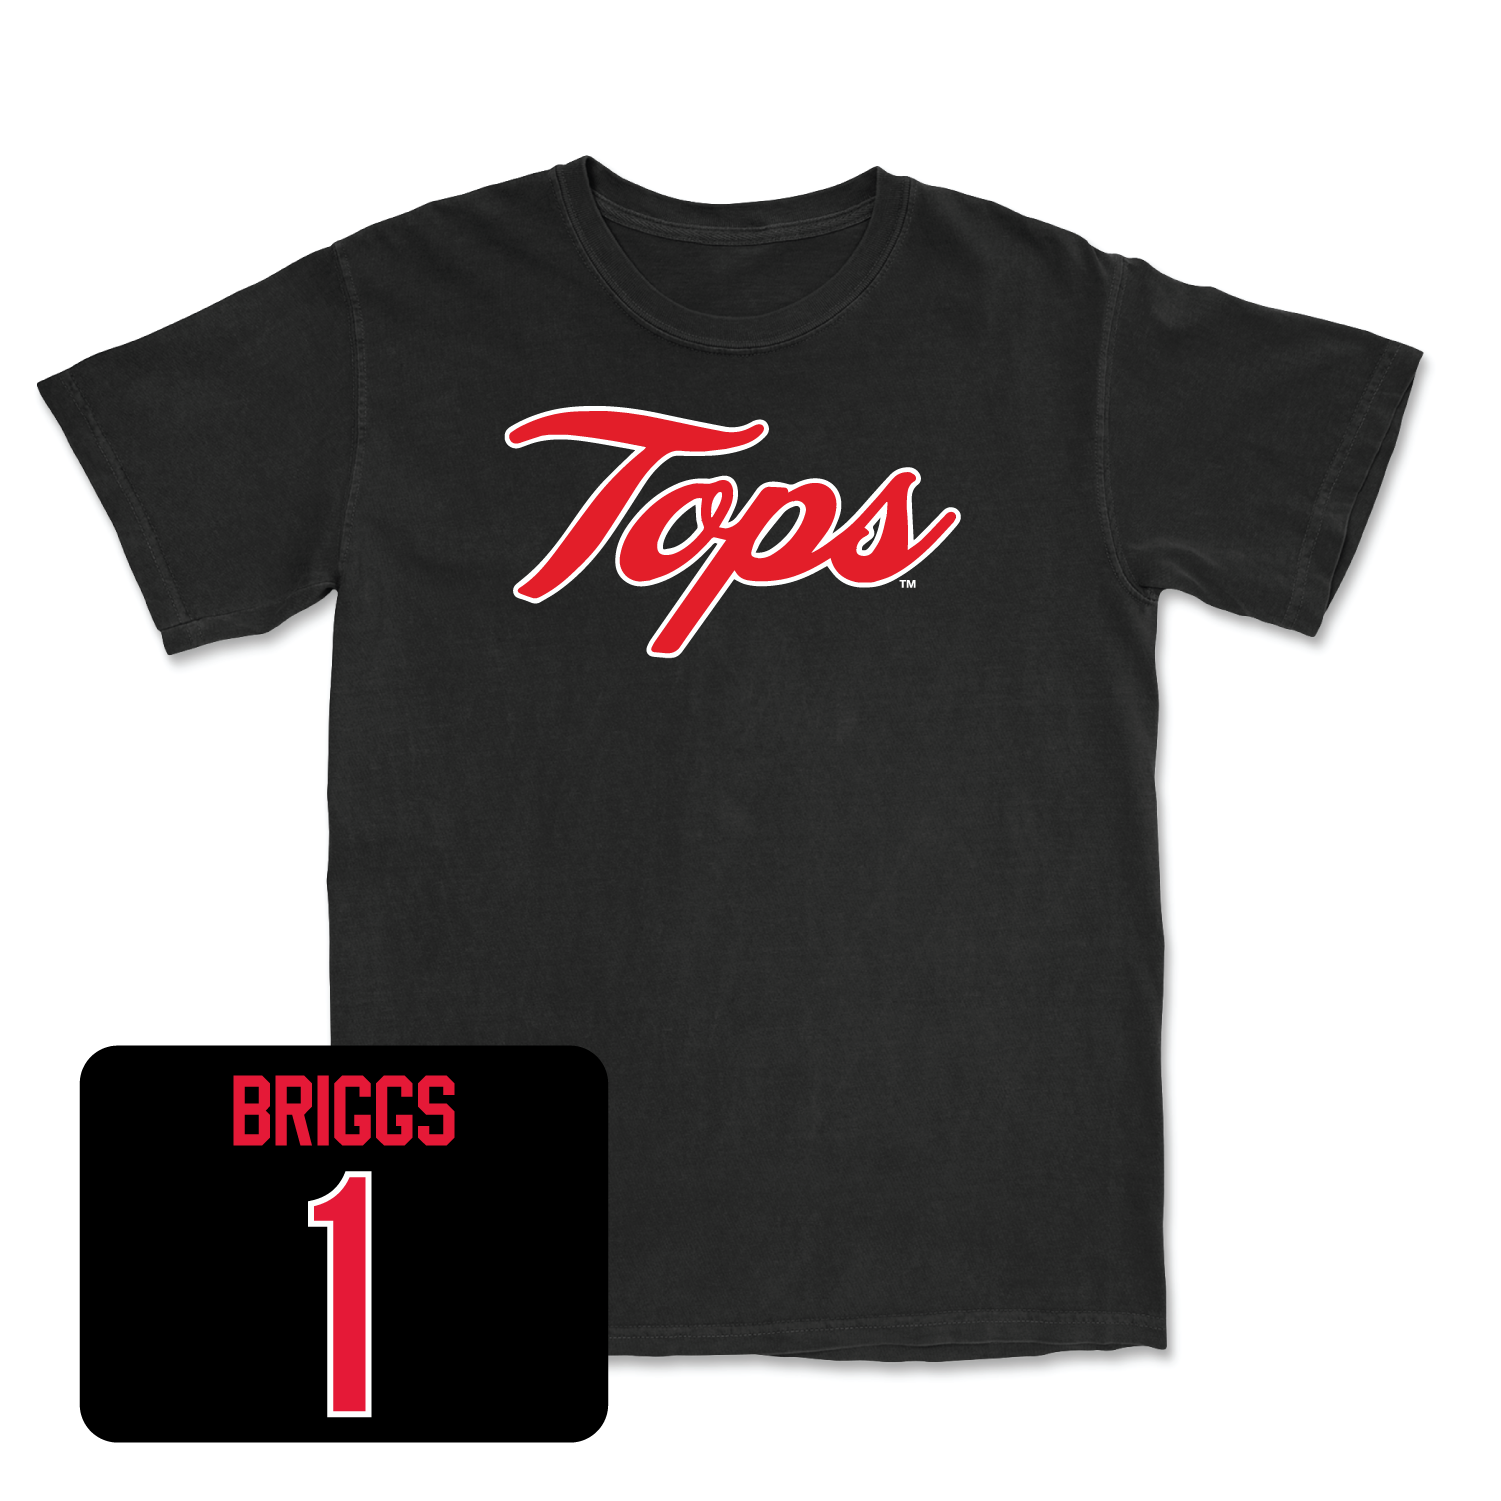 Black Women's Volleyball Tops Tee Small / Paige Briggs | #1